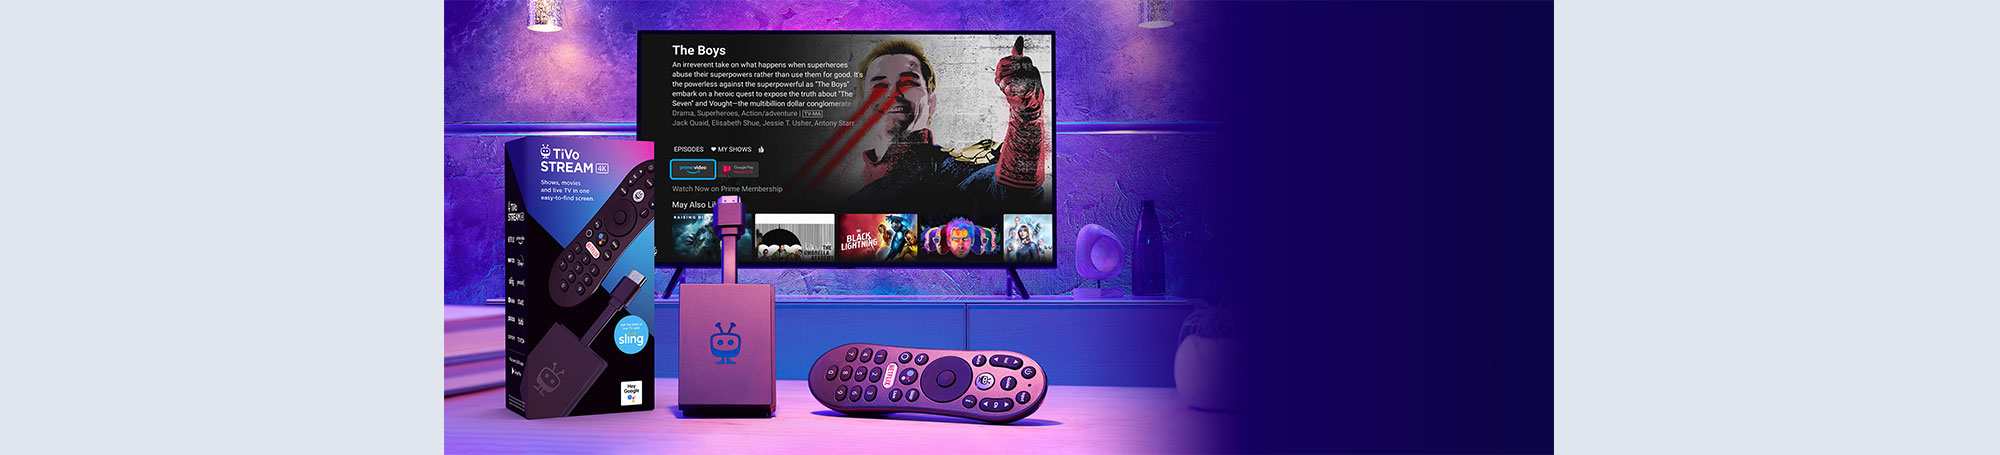 Streaming media player with TV in background